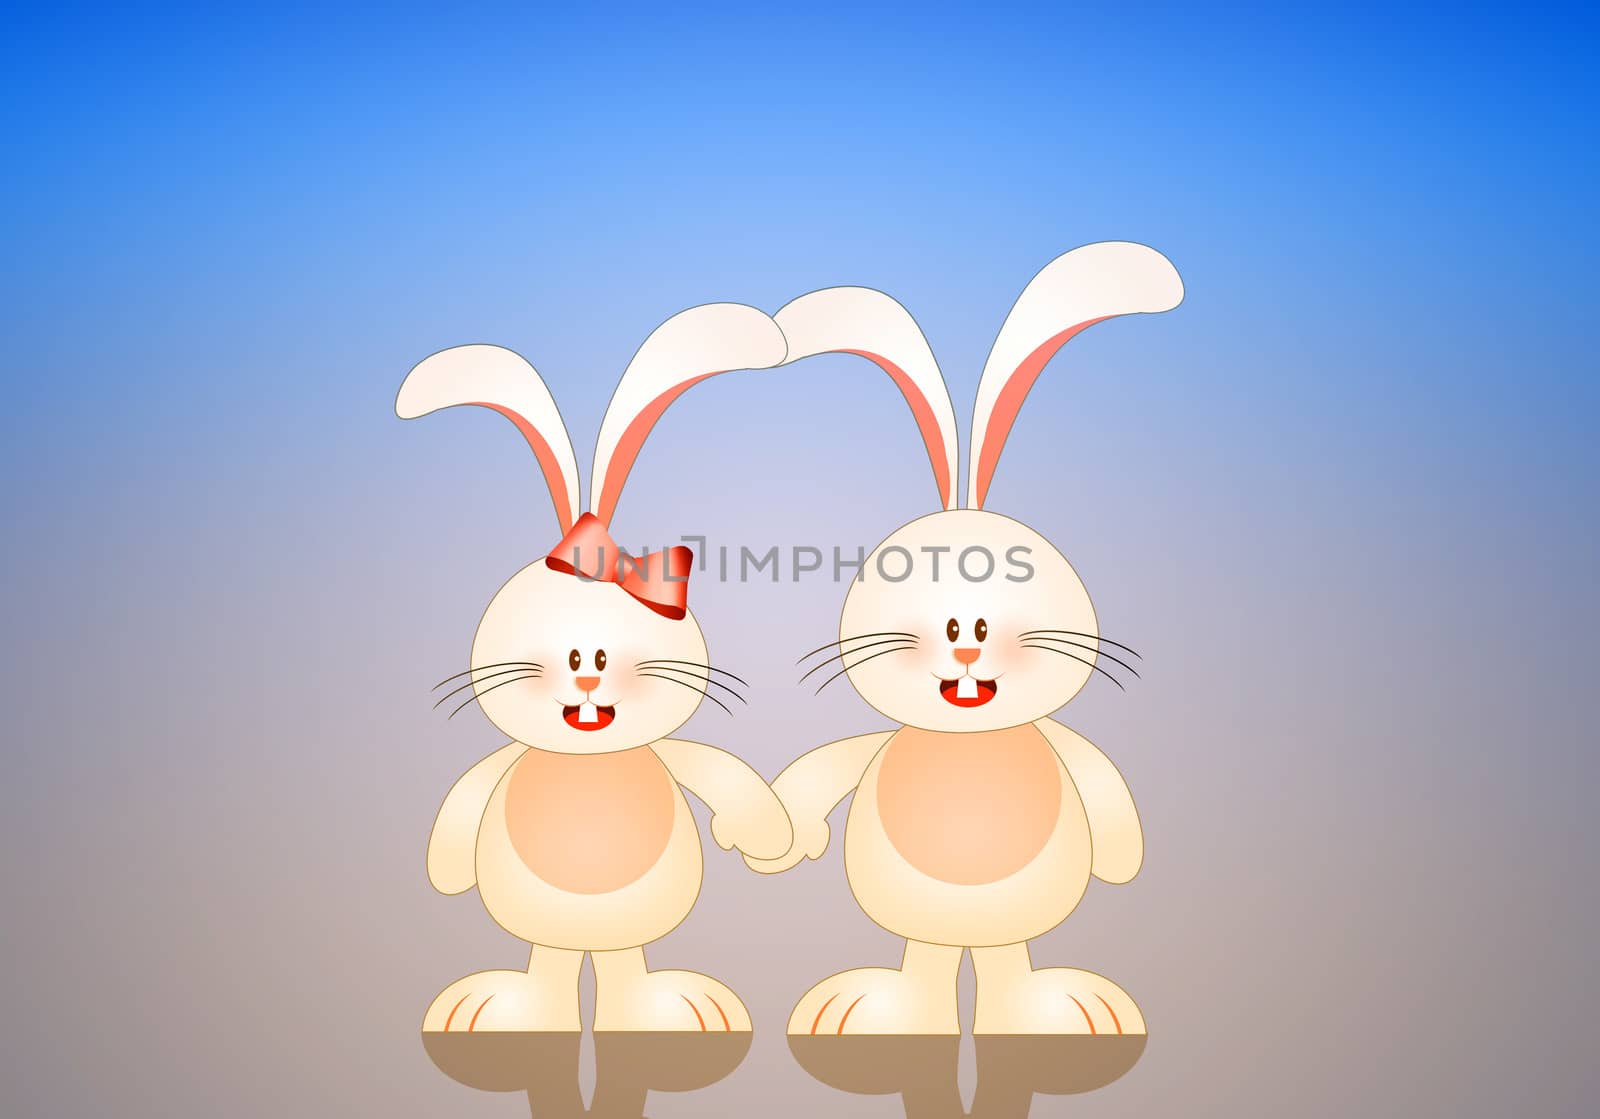 Two bunnies in love for Valentine's Day